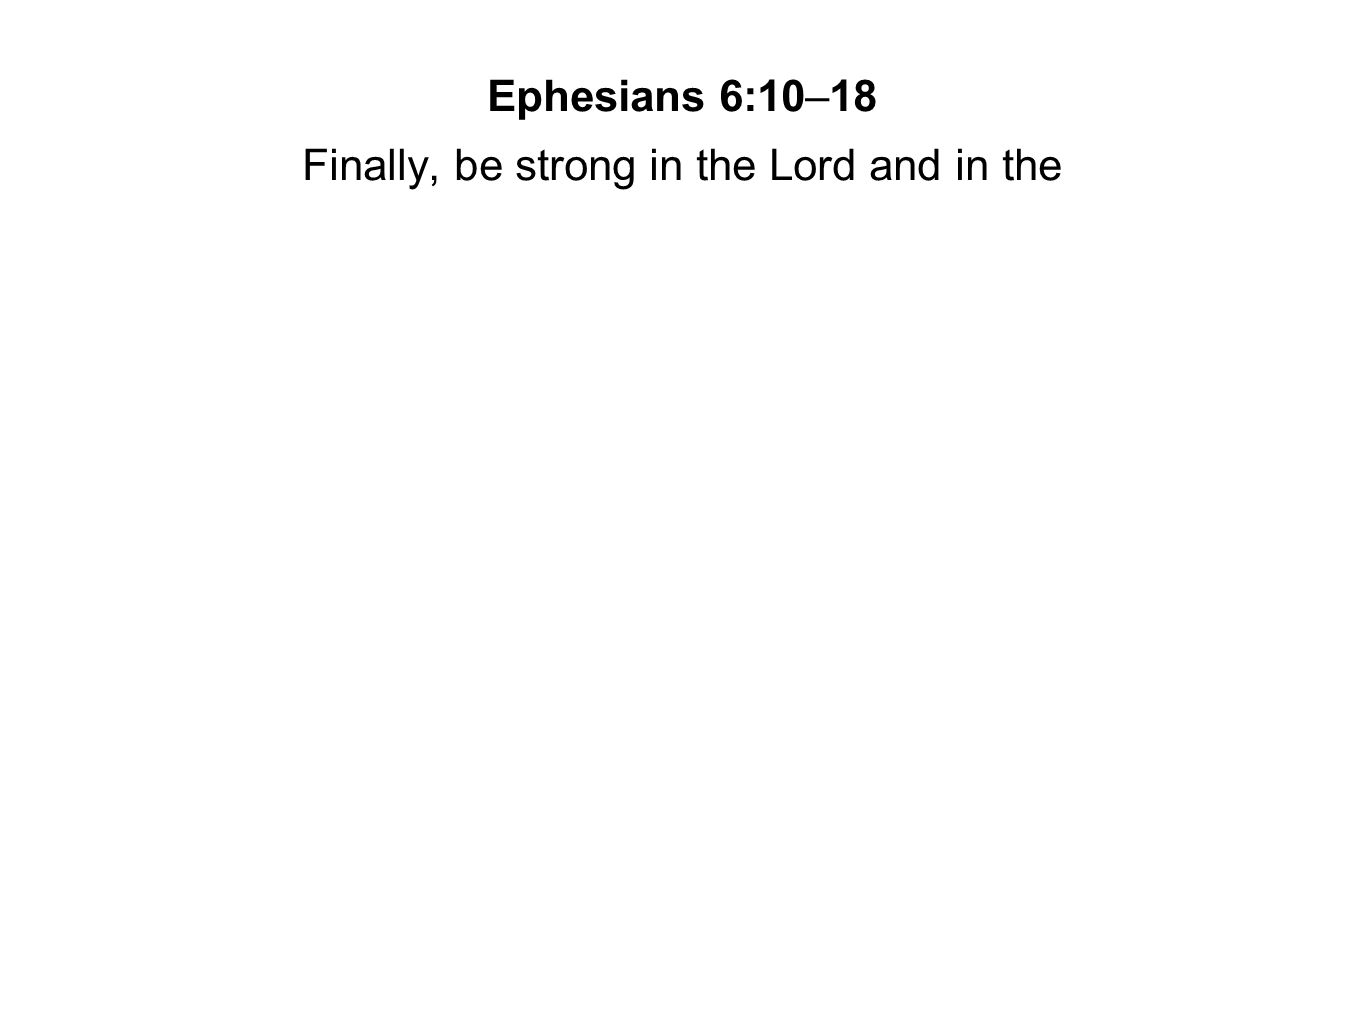 Finally, be strong in the Lord and in the